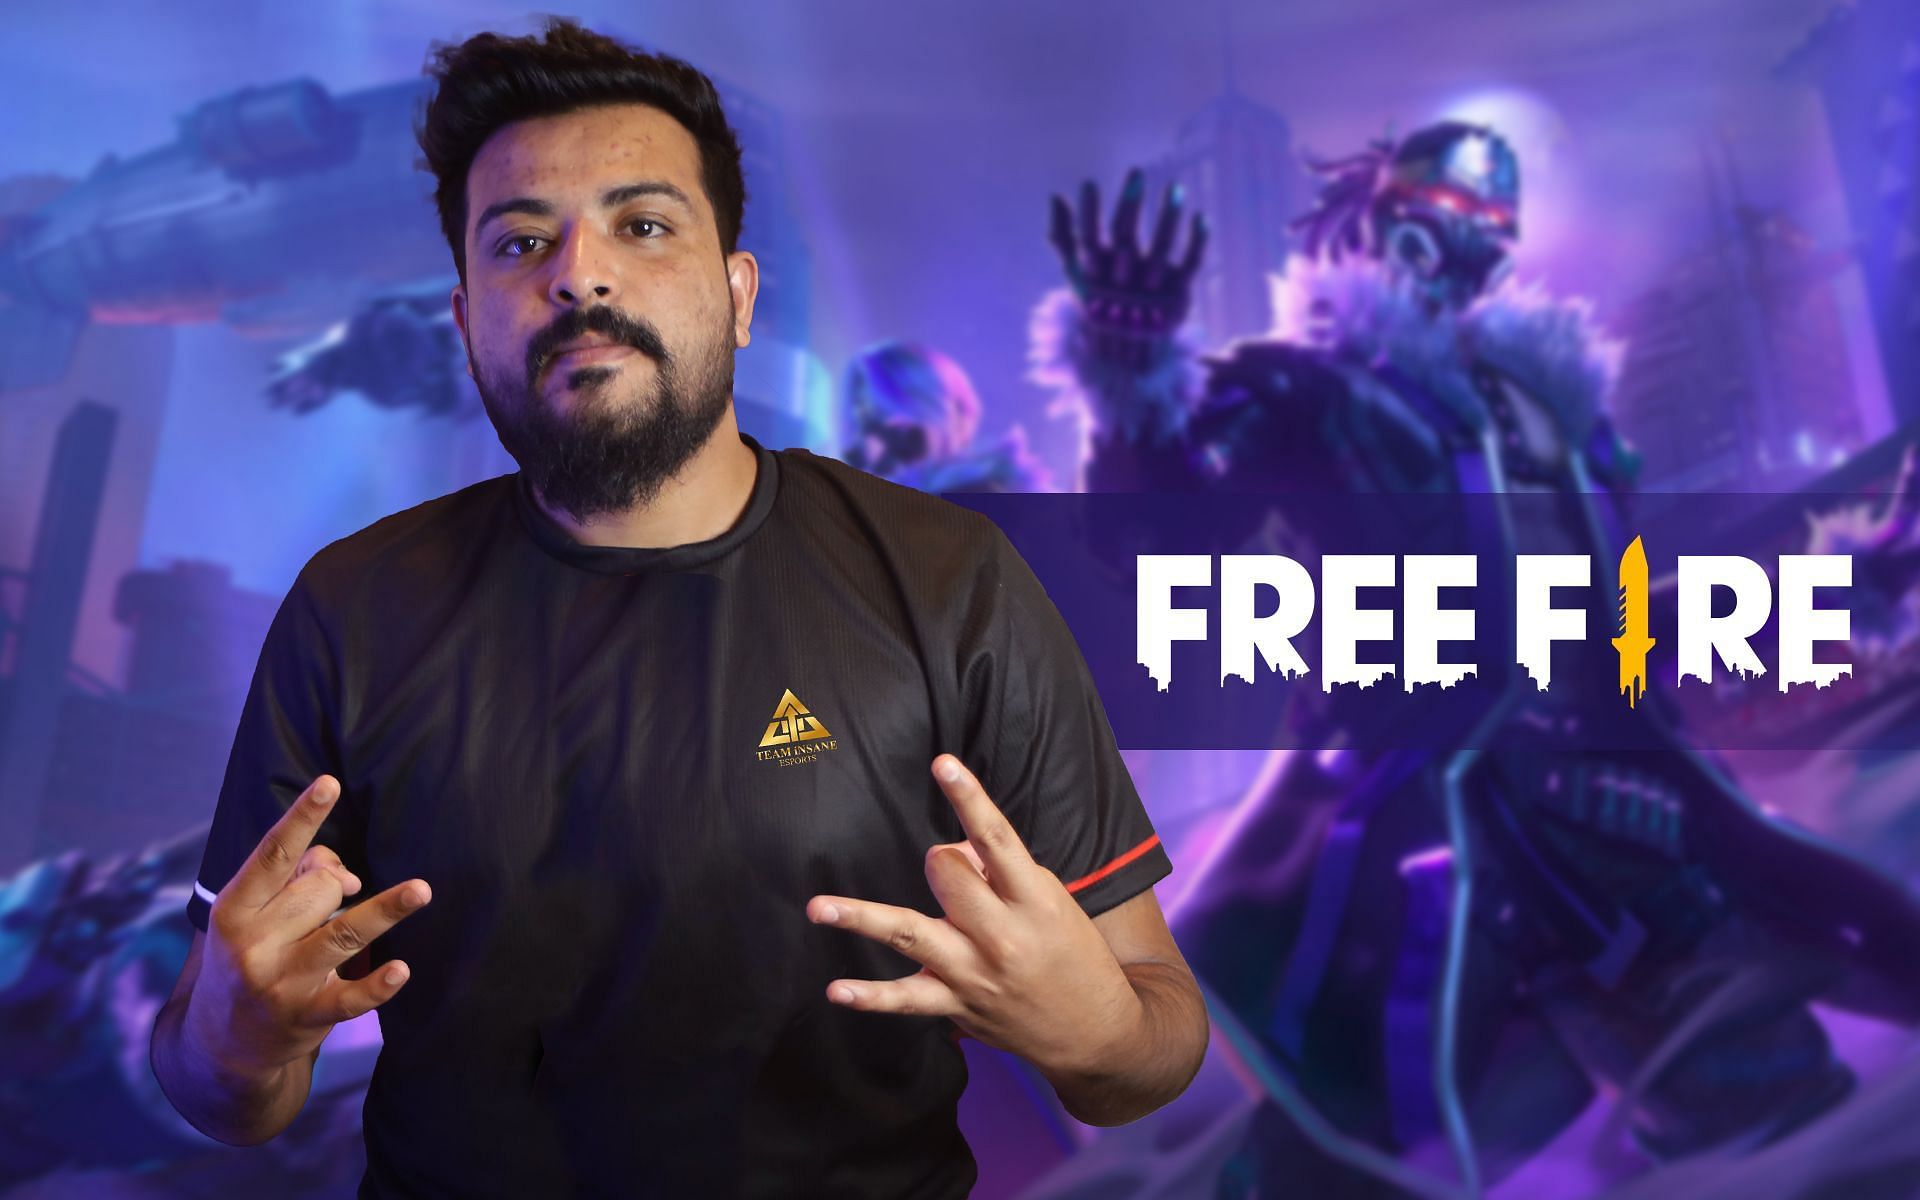 Shahid is the in-game leader and coach of Team Insane Esports&rsquo; Free Fire line-up (Image via Sportskeeda)